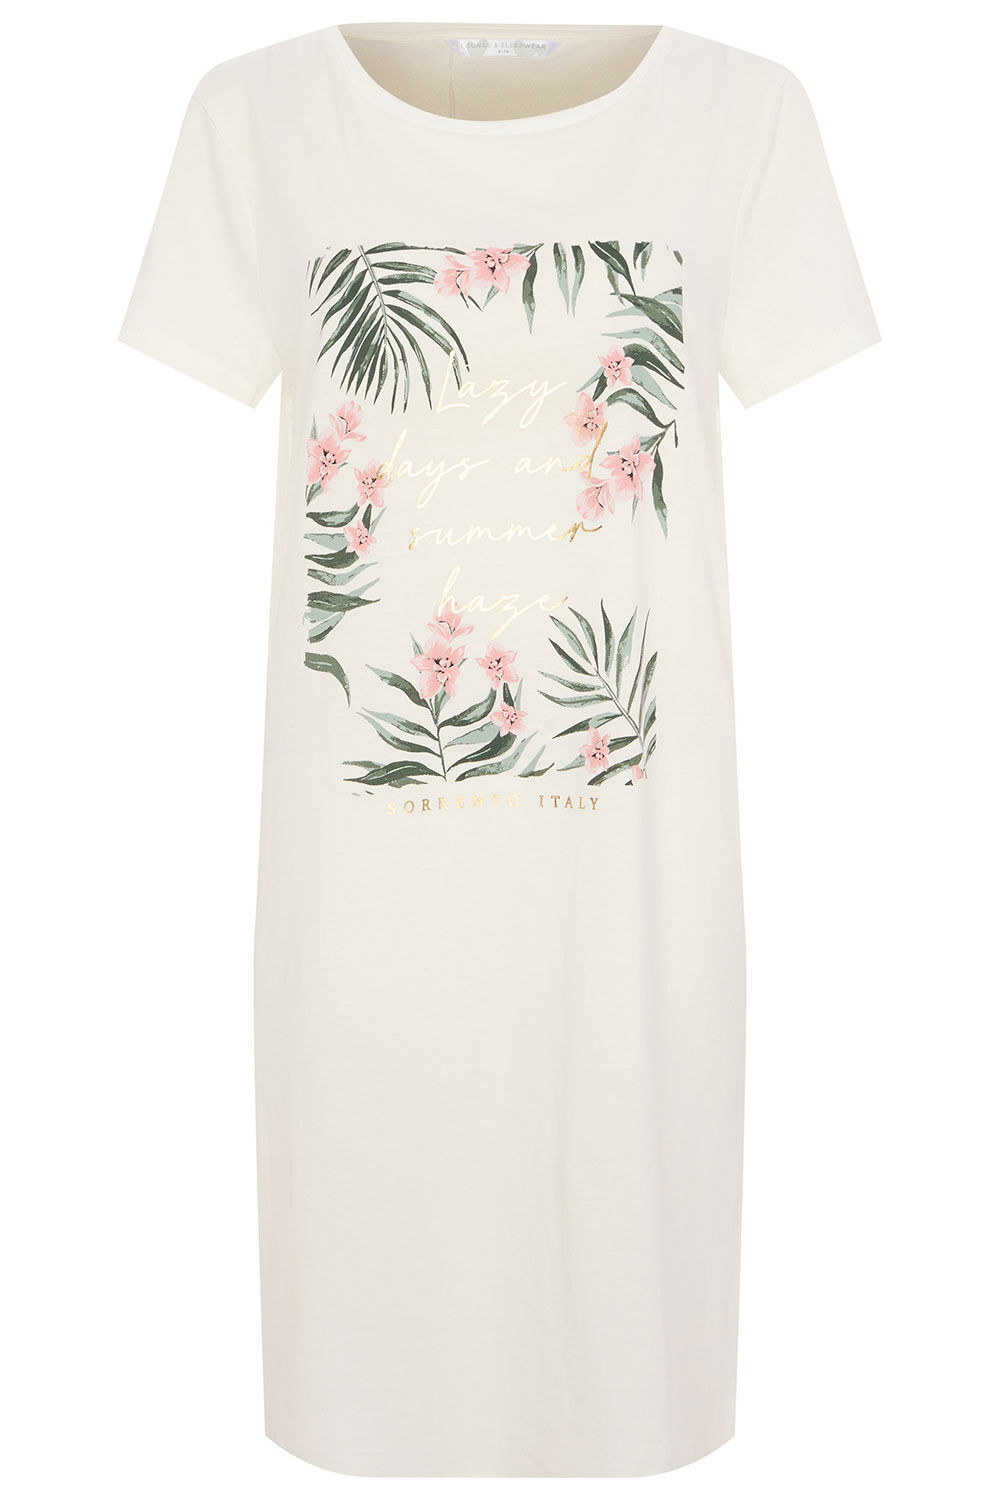 Bonmarche Cream Short Sleeve Palm and Floral Print Jersey Nightdress, Size: 20-22